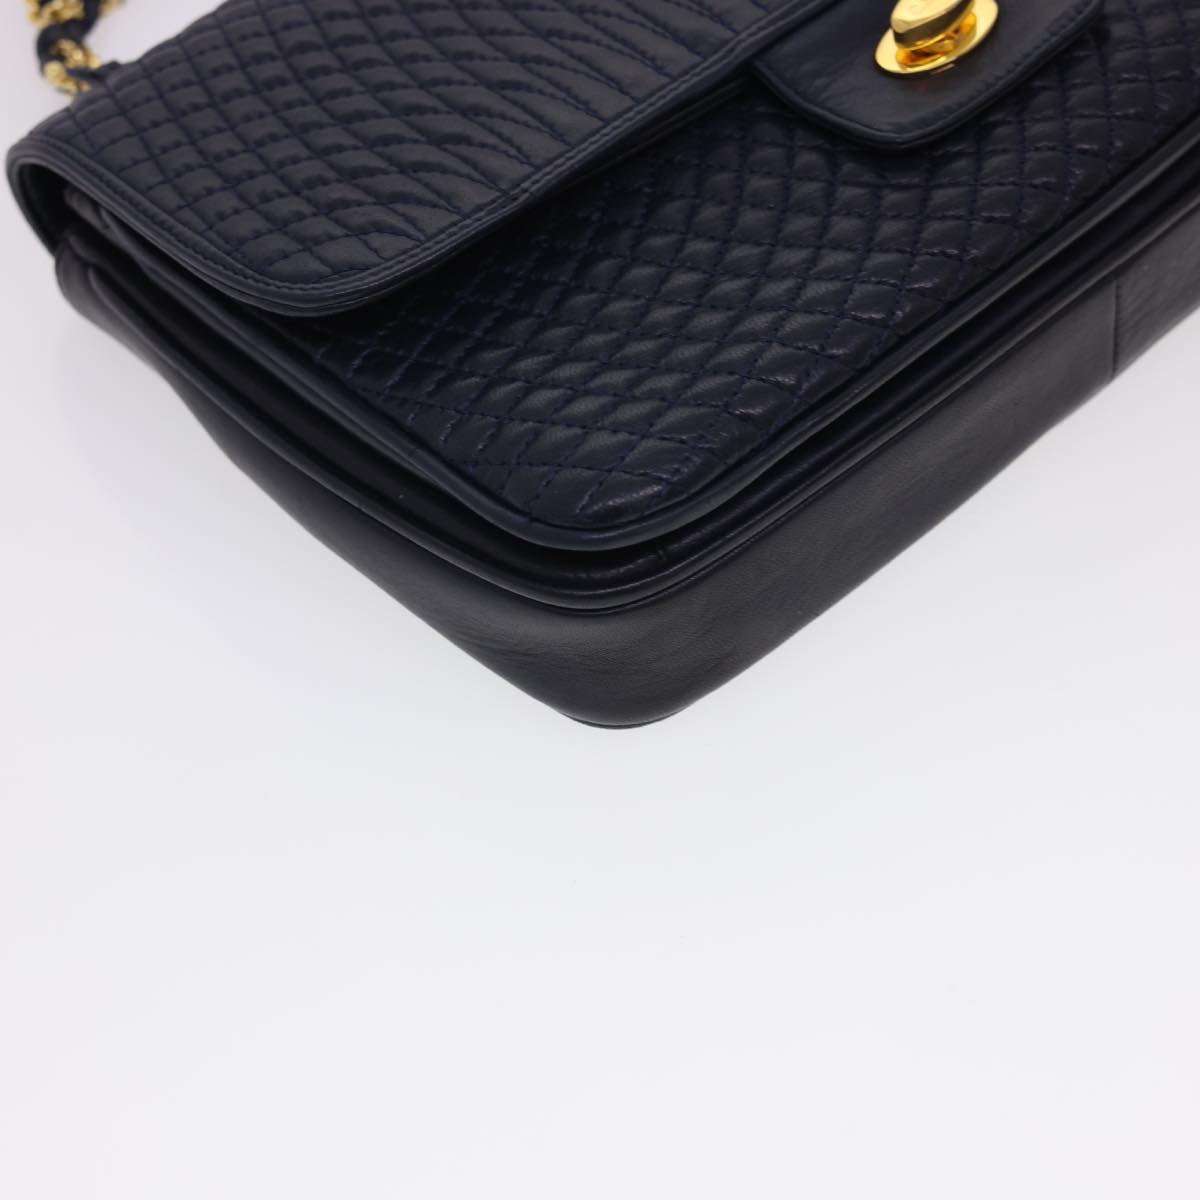 BALLY Quilted Chain Shoulder Bag Leather Navy Auth yk6540